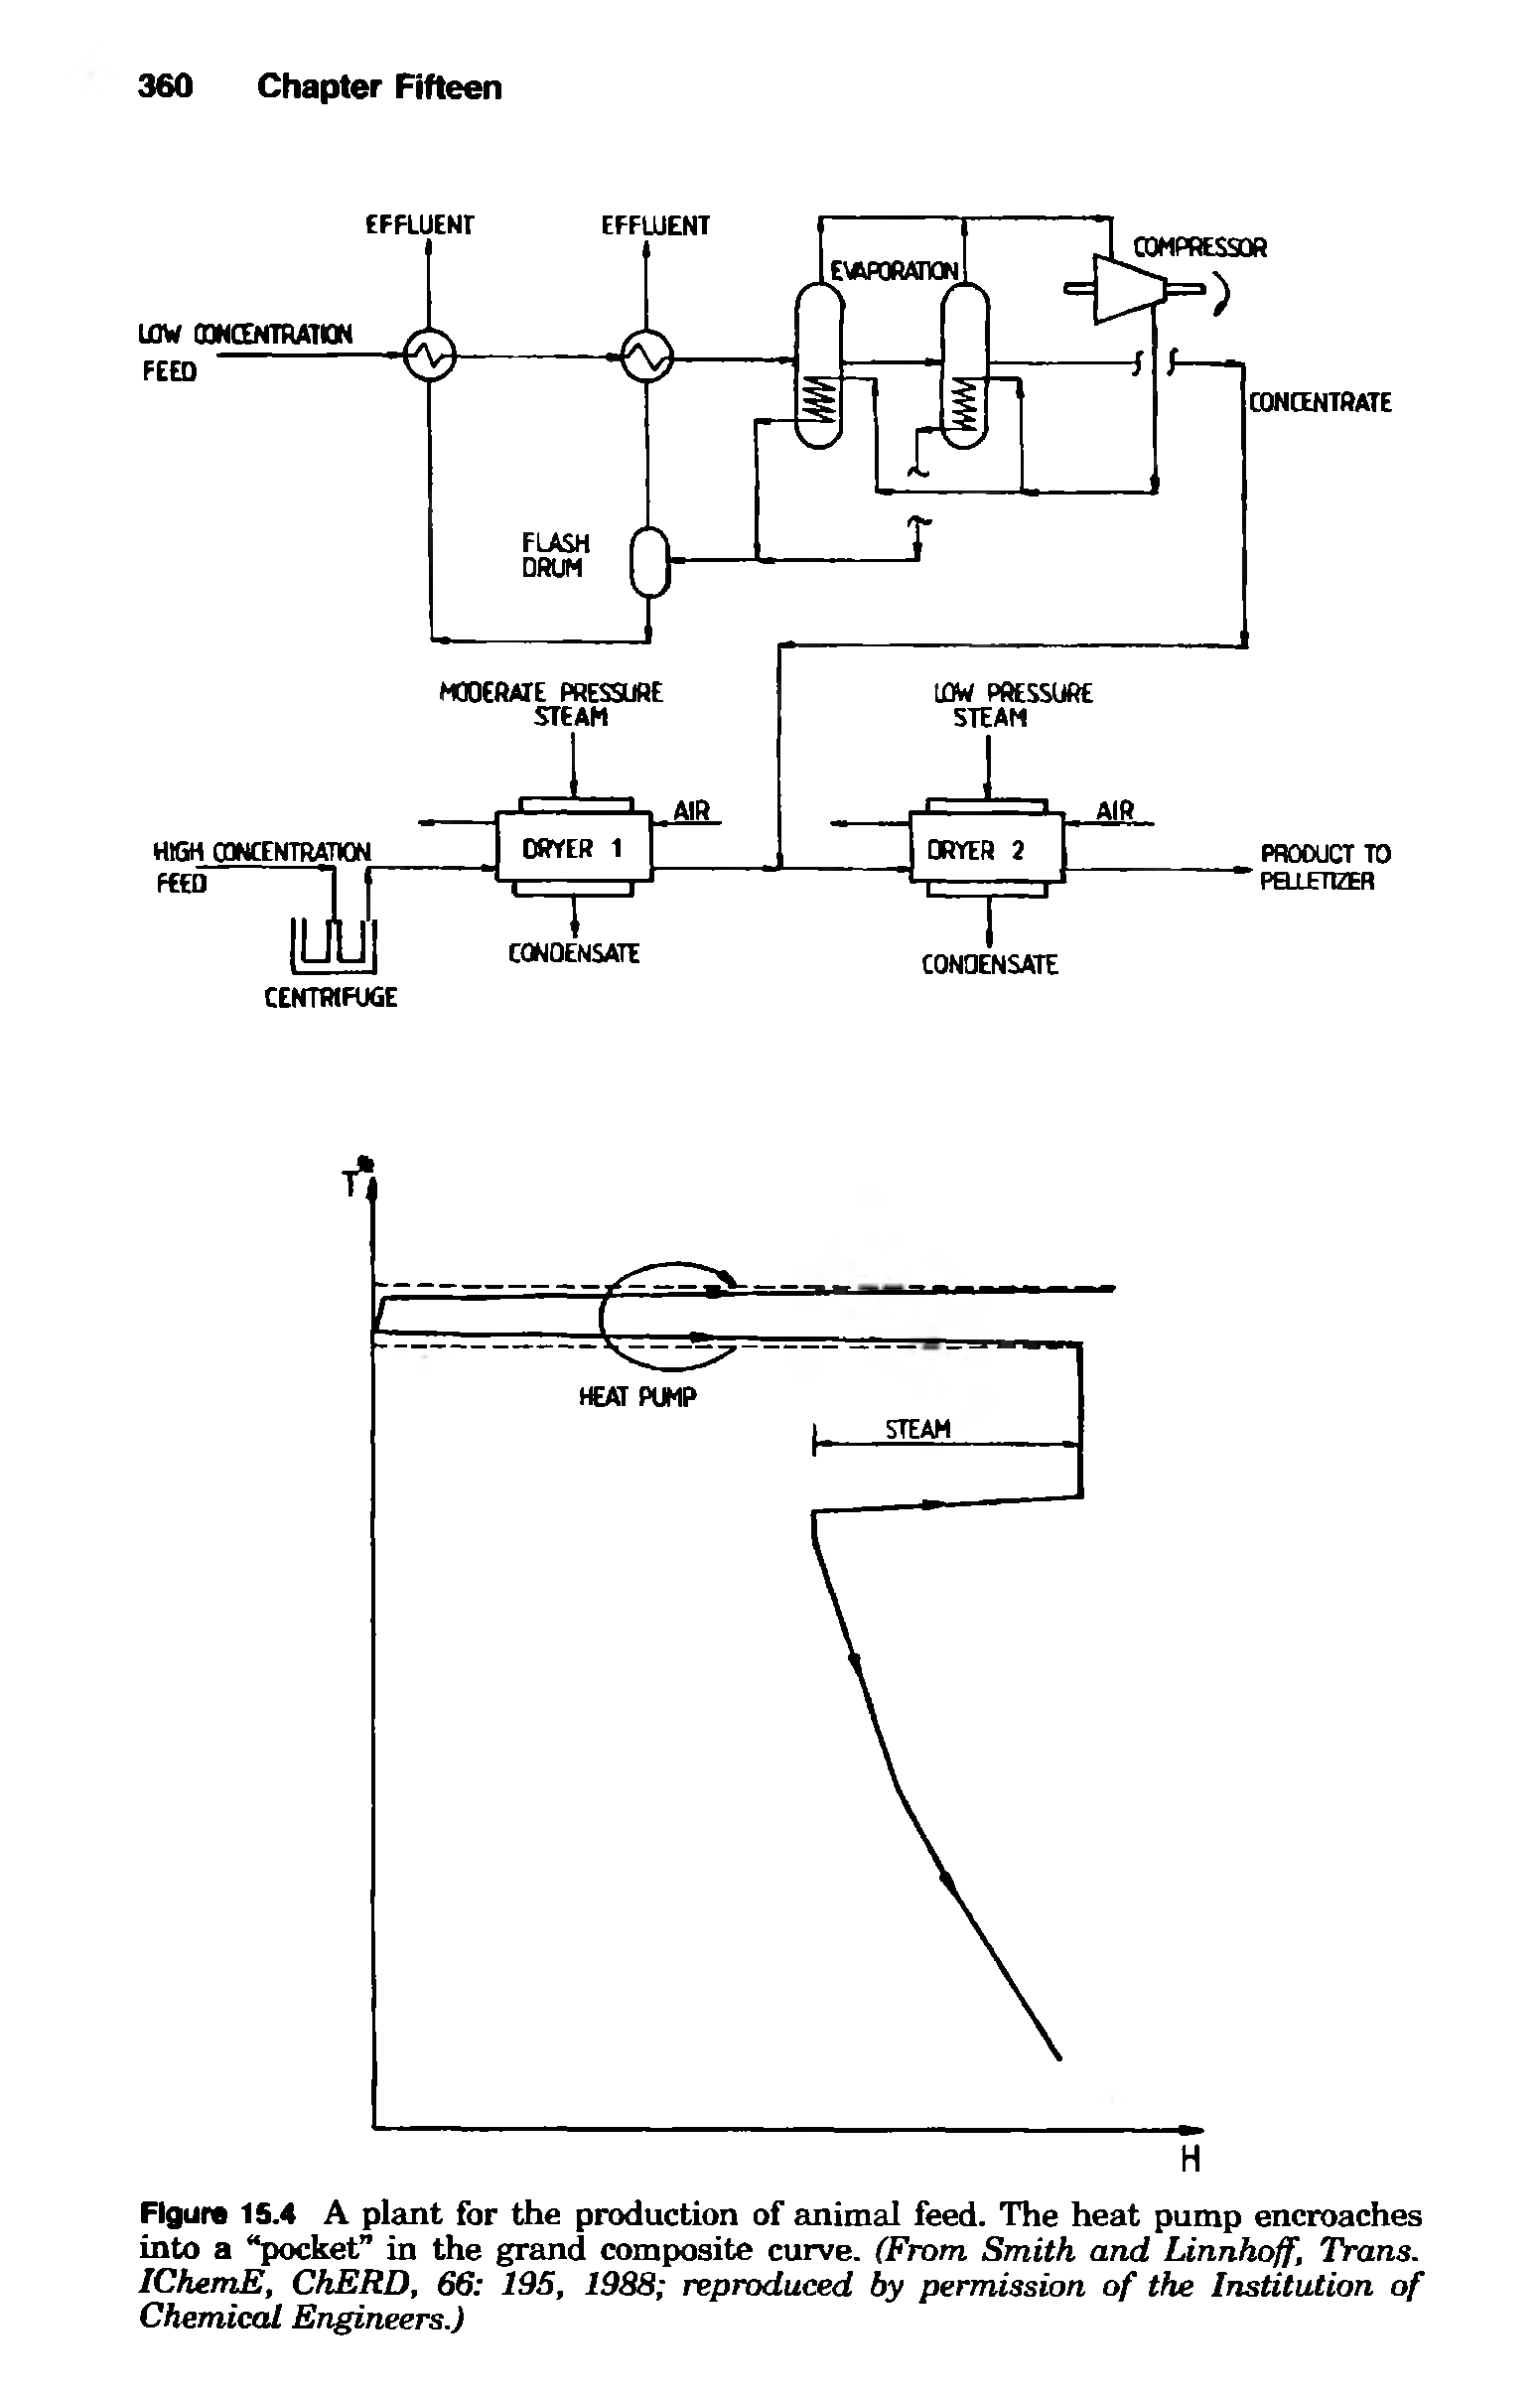 Figure 15.4 A plant for the production of animal feed. The heat pump encroaches into a pocket in the gremd composite curve. (From Smith and Linnhojf, Trans. IChemE, ChERD, 66 195, 1988 reproduced by permission of the Institution of Chemical Engineers.)...